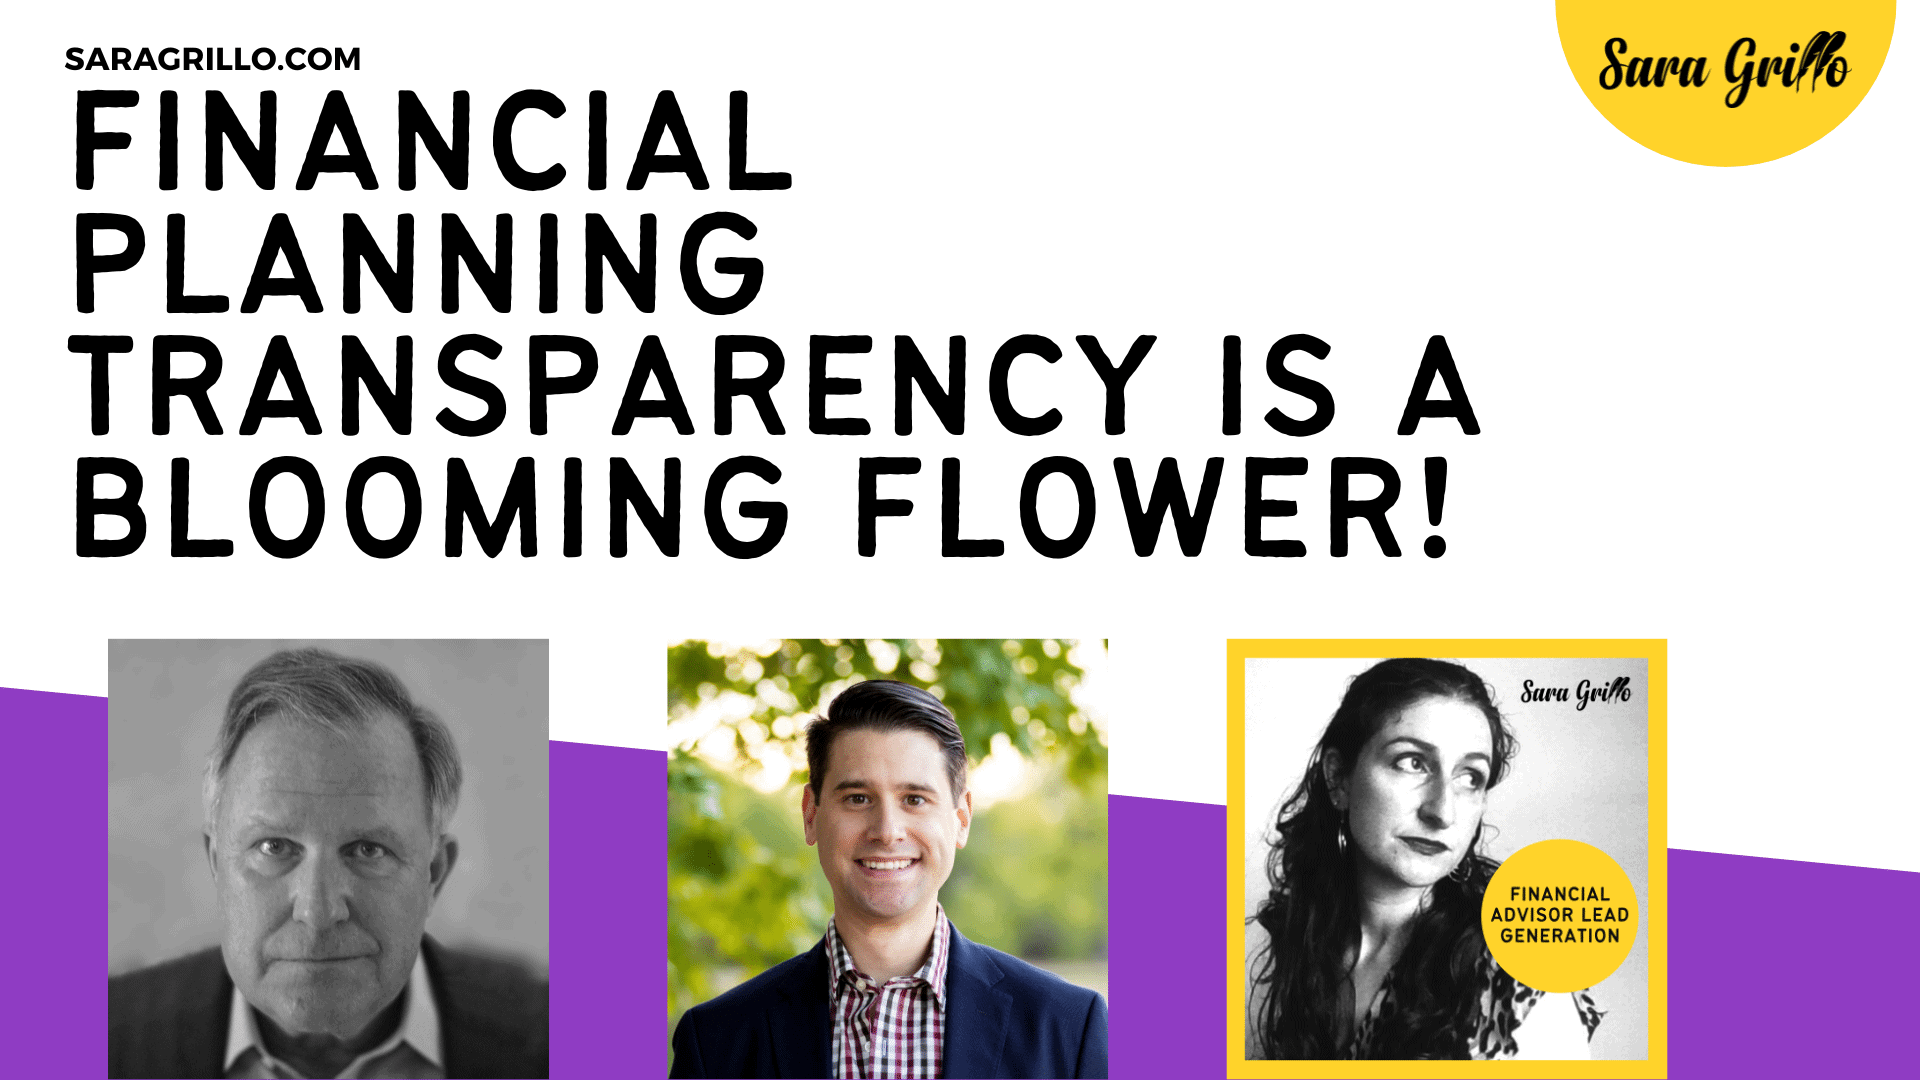 Financial planning transparency is a flower that is blooming that will nourish the world of financial advice and elevate service to clients!